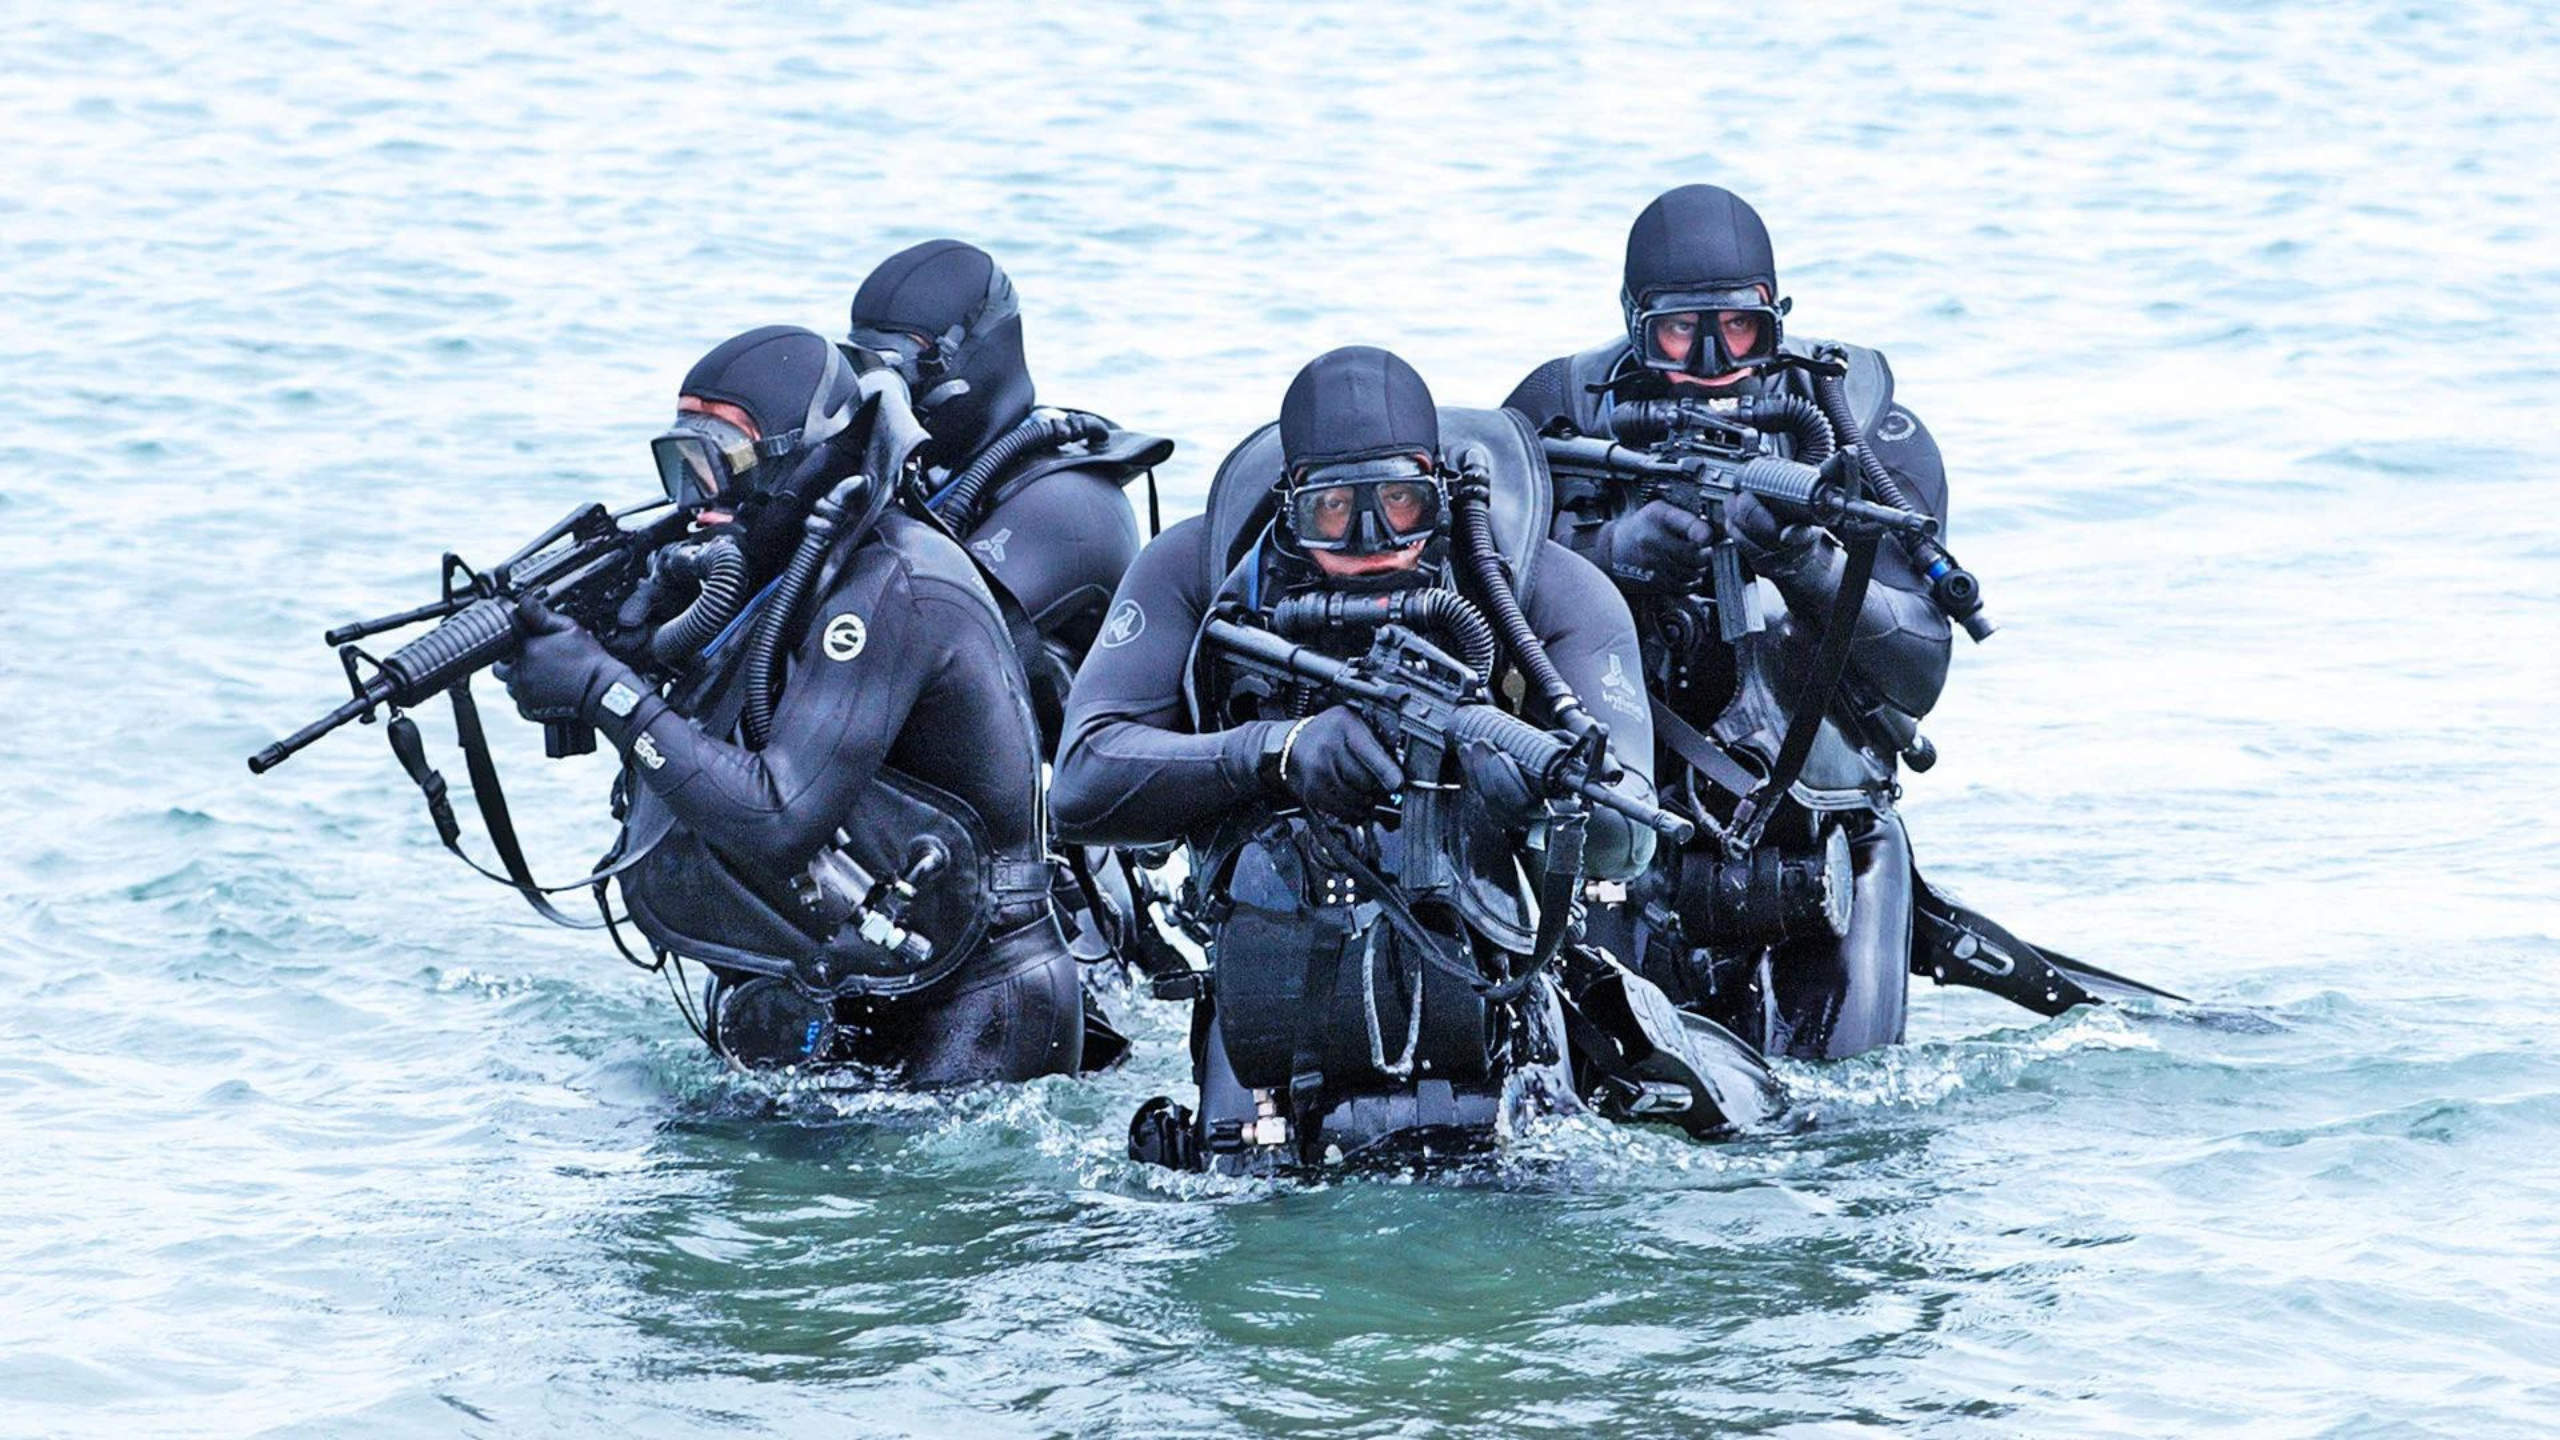 US Navy Seals submerging from water